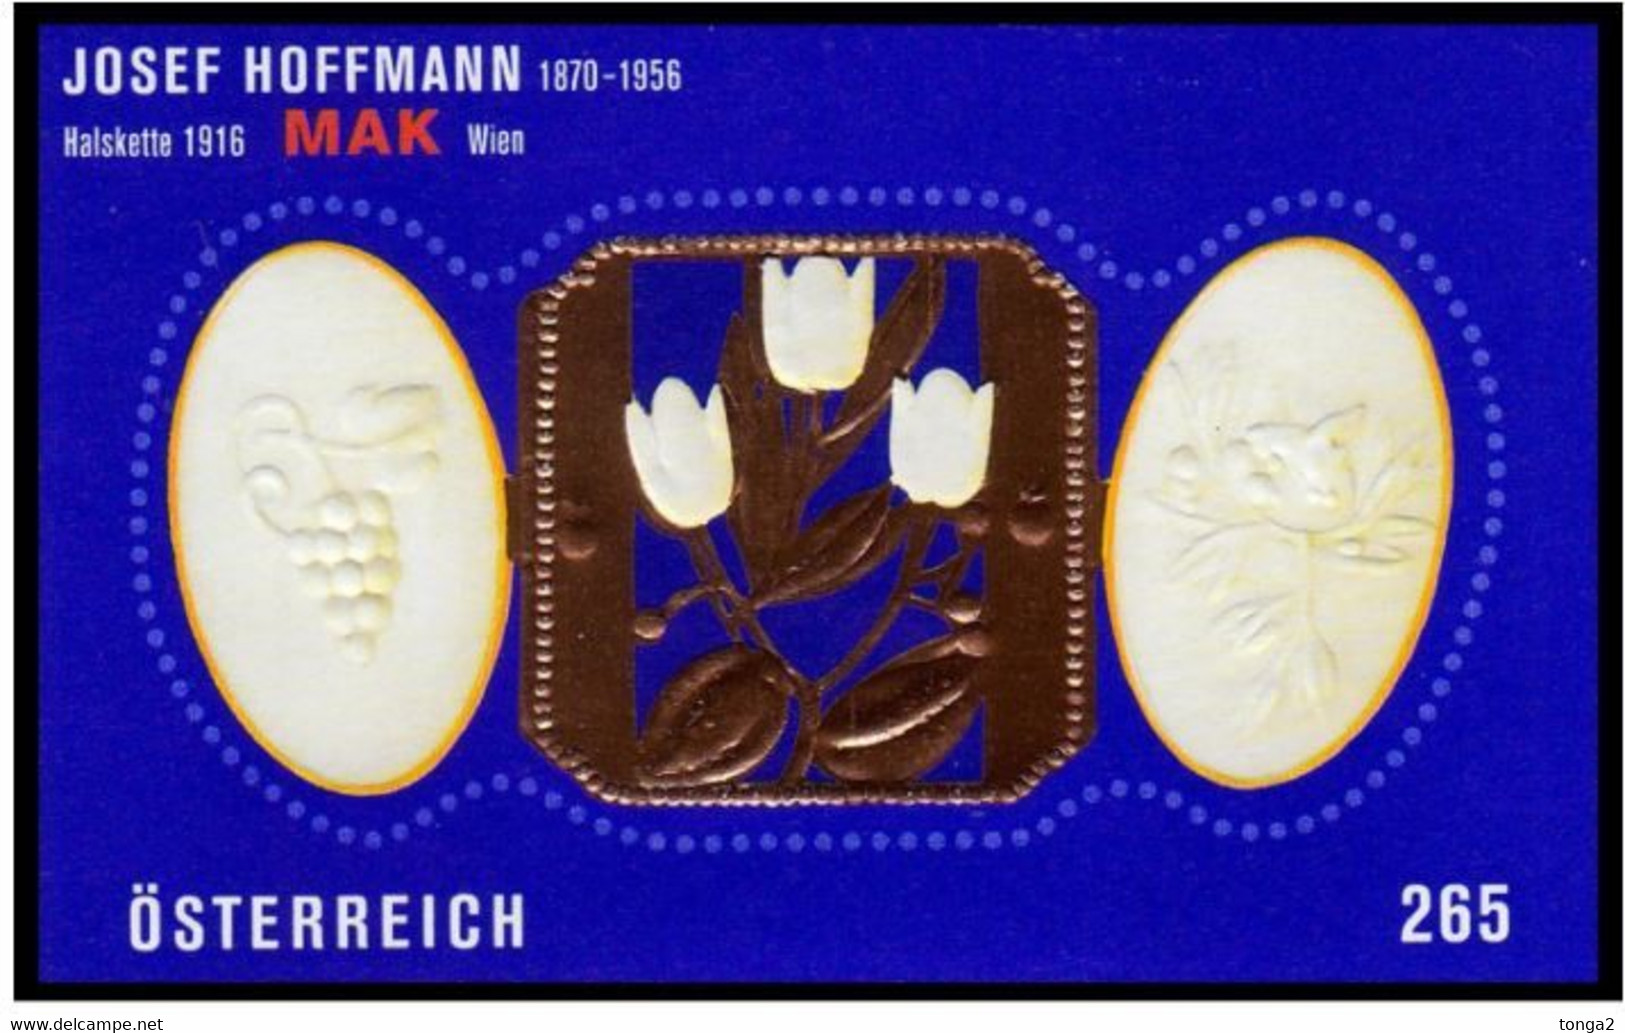 Austria 2007 Hoffmann Stamp With 22 Carat Gold Affixed - Unusual - Hologrammes